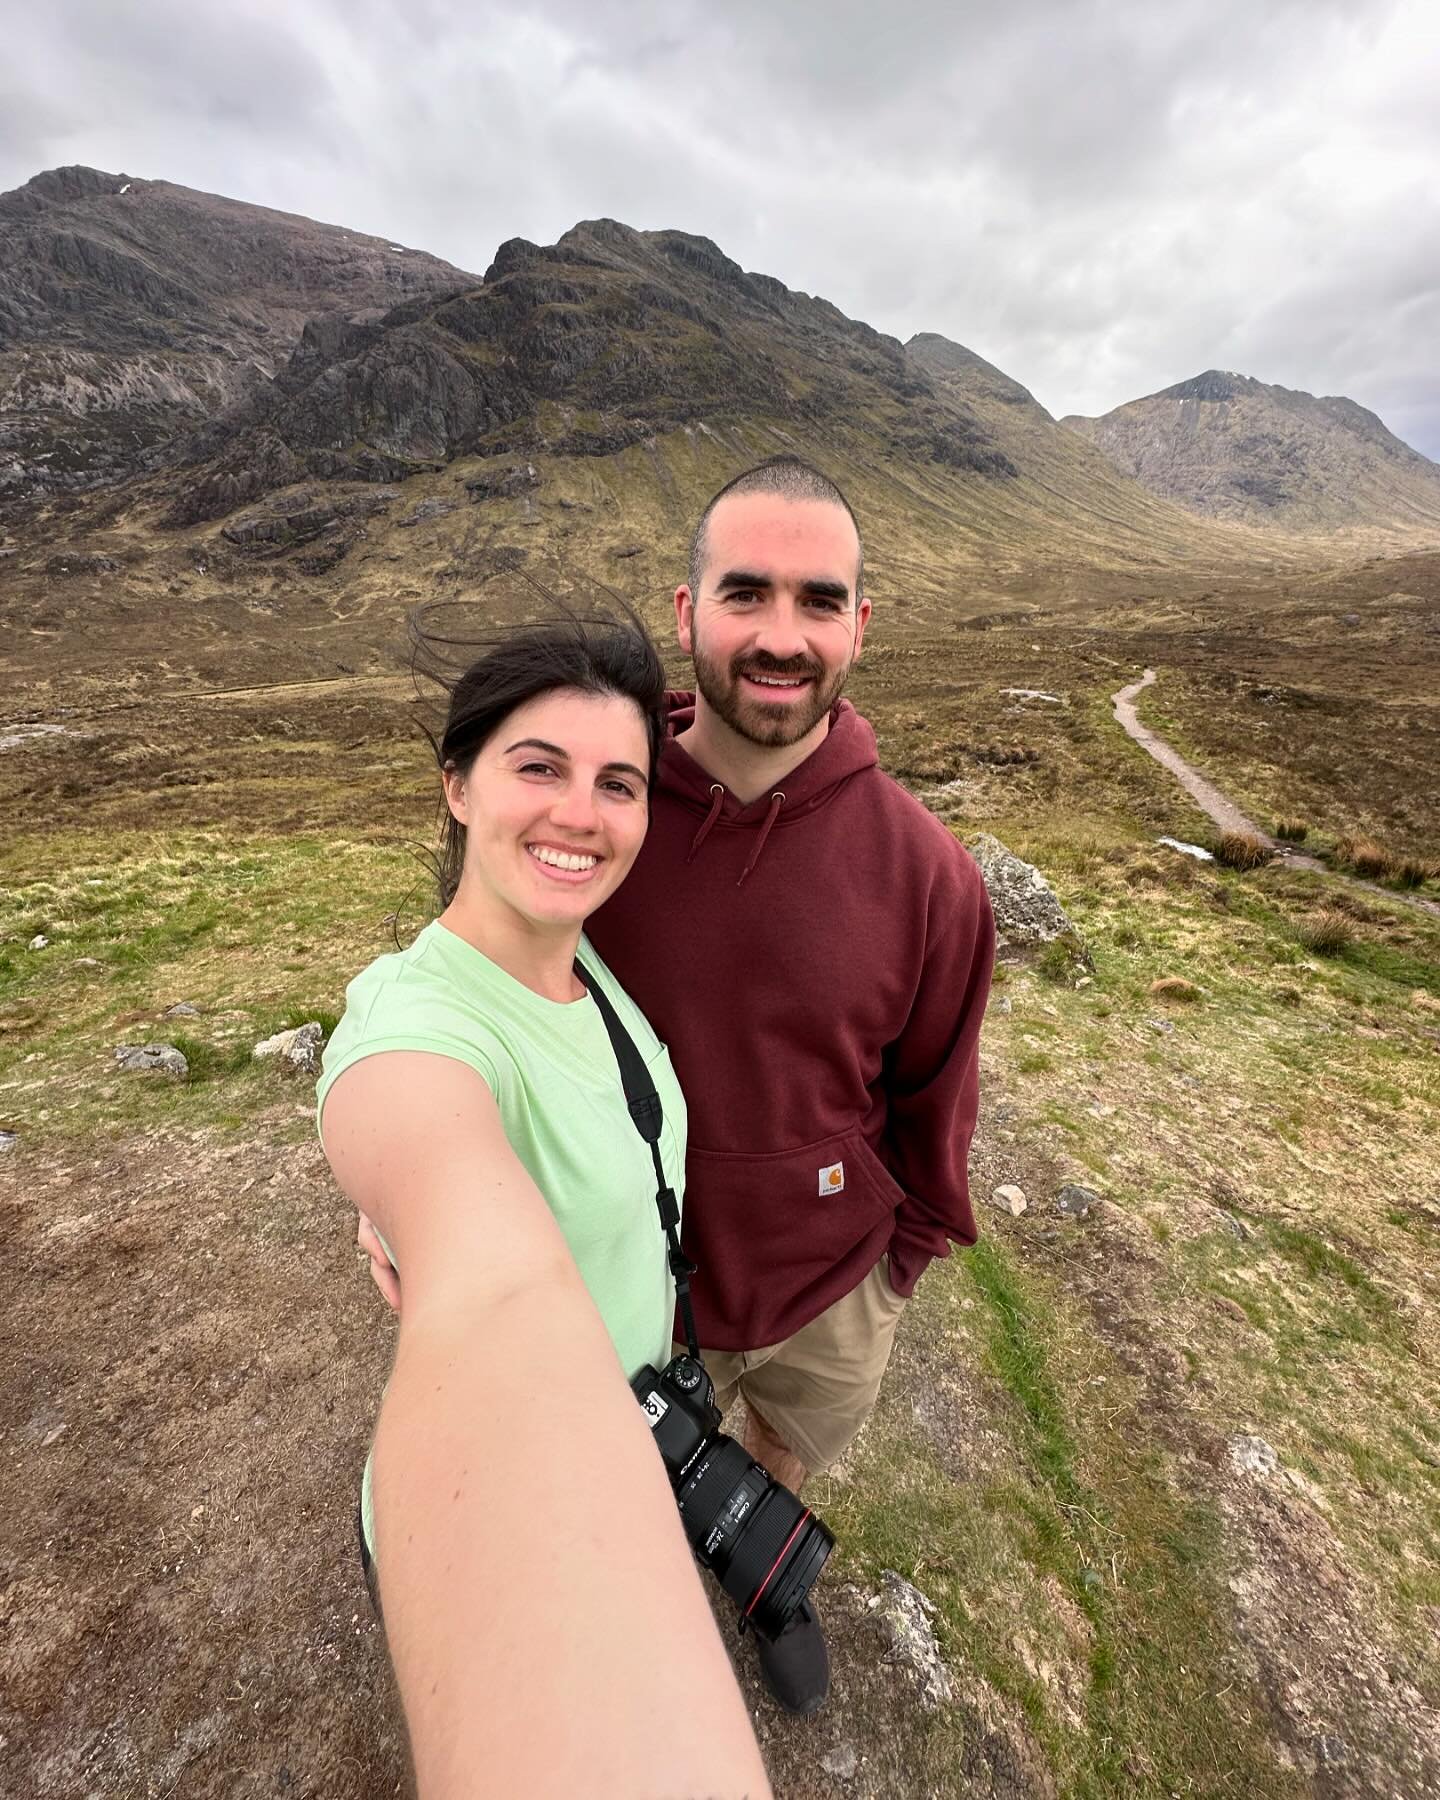 A little phone dump of where we were last week!! 😍

✨Scotland✨

Scotland has been on our bucket list for quite some time, so we were SO excited to finally visit. We spent a week traveling through the highlands, and the views were so beautiful!

I&rs